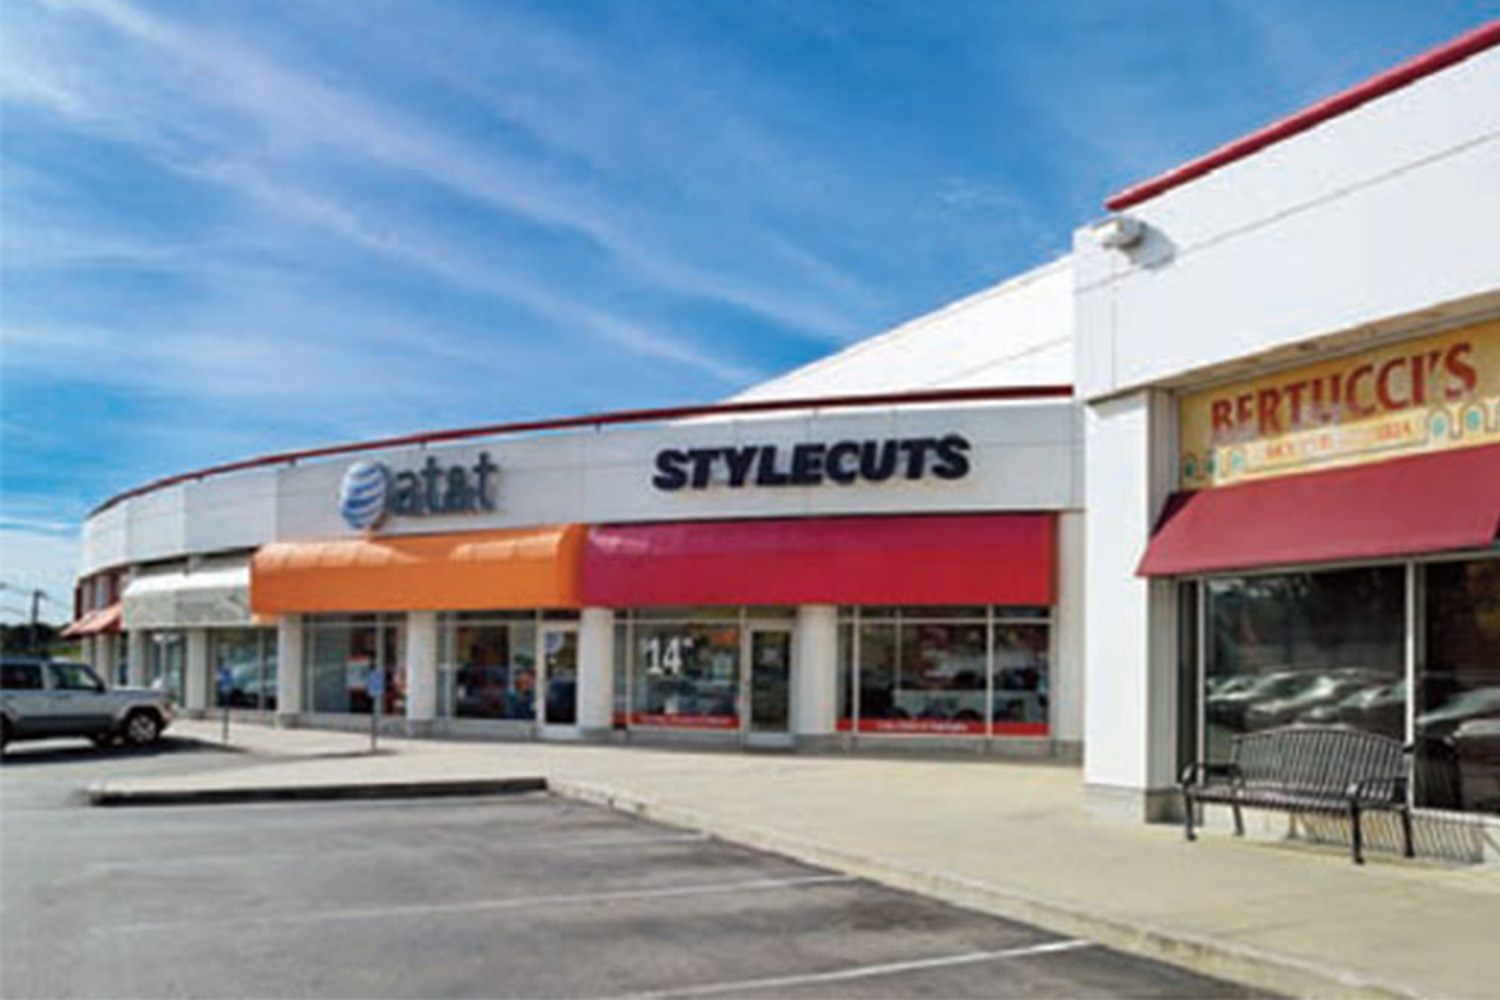 Storefronts for "AT&T", "Style cuts" and "Bertucci's"  